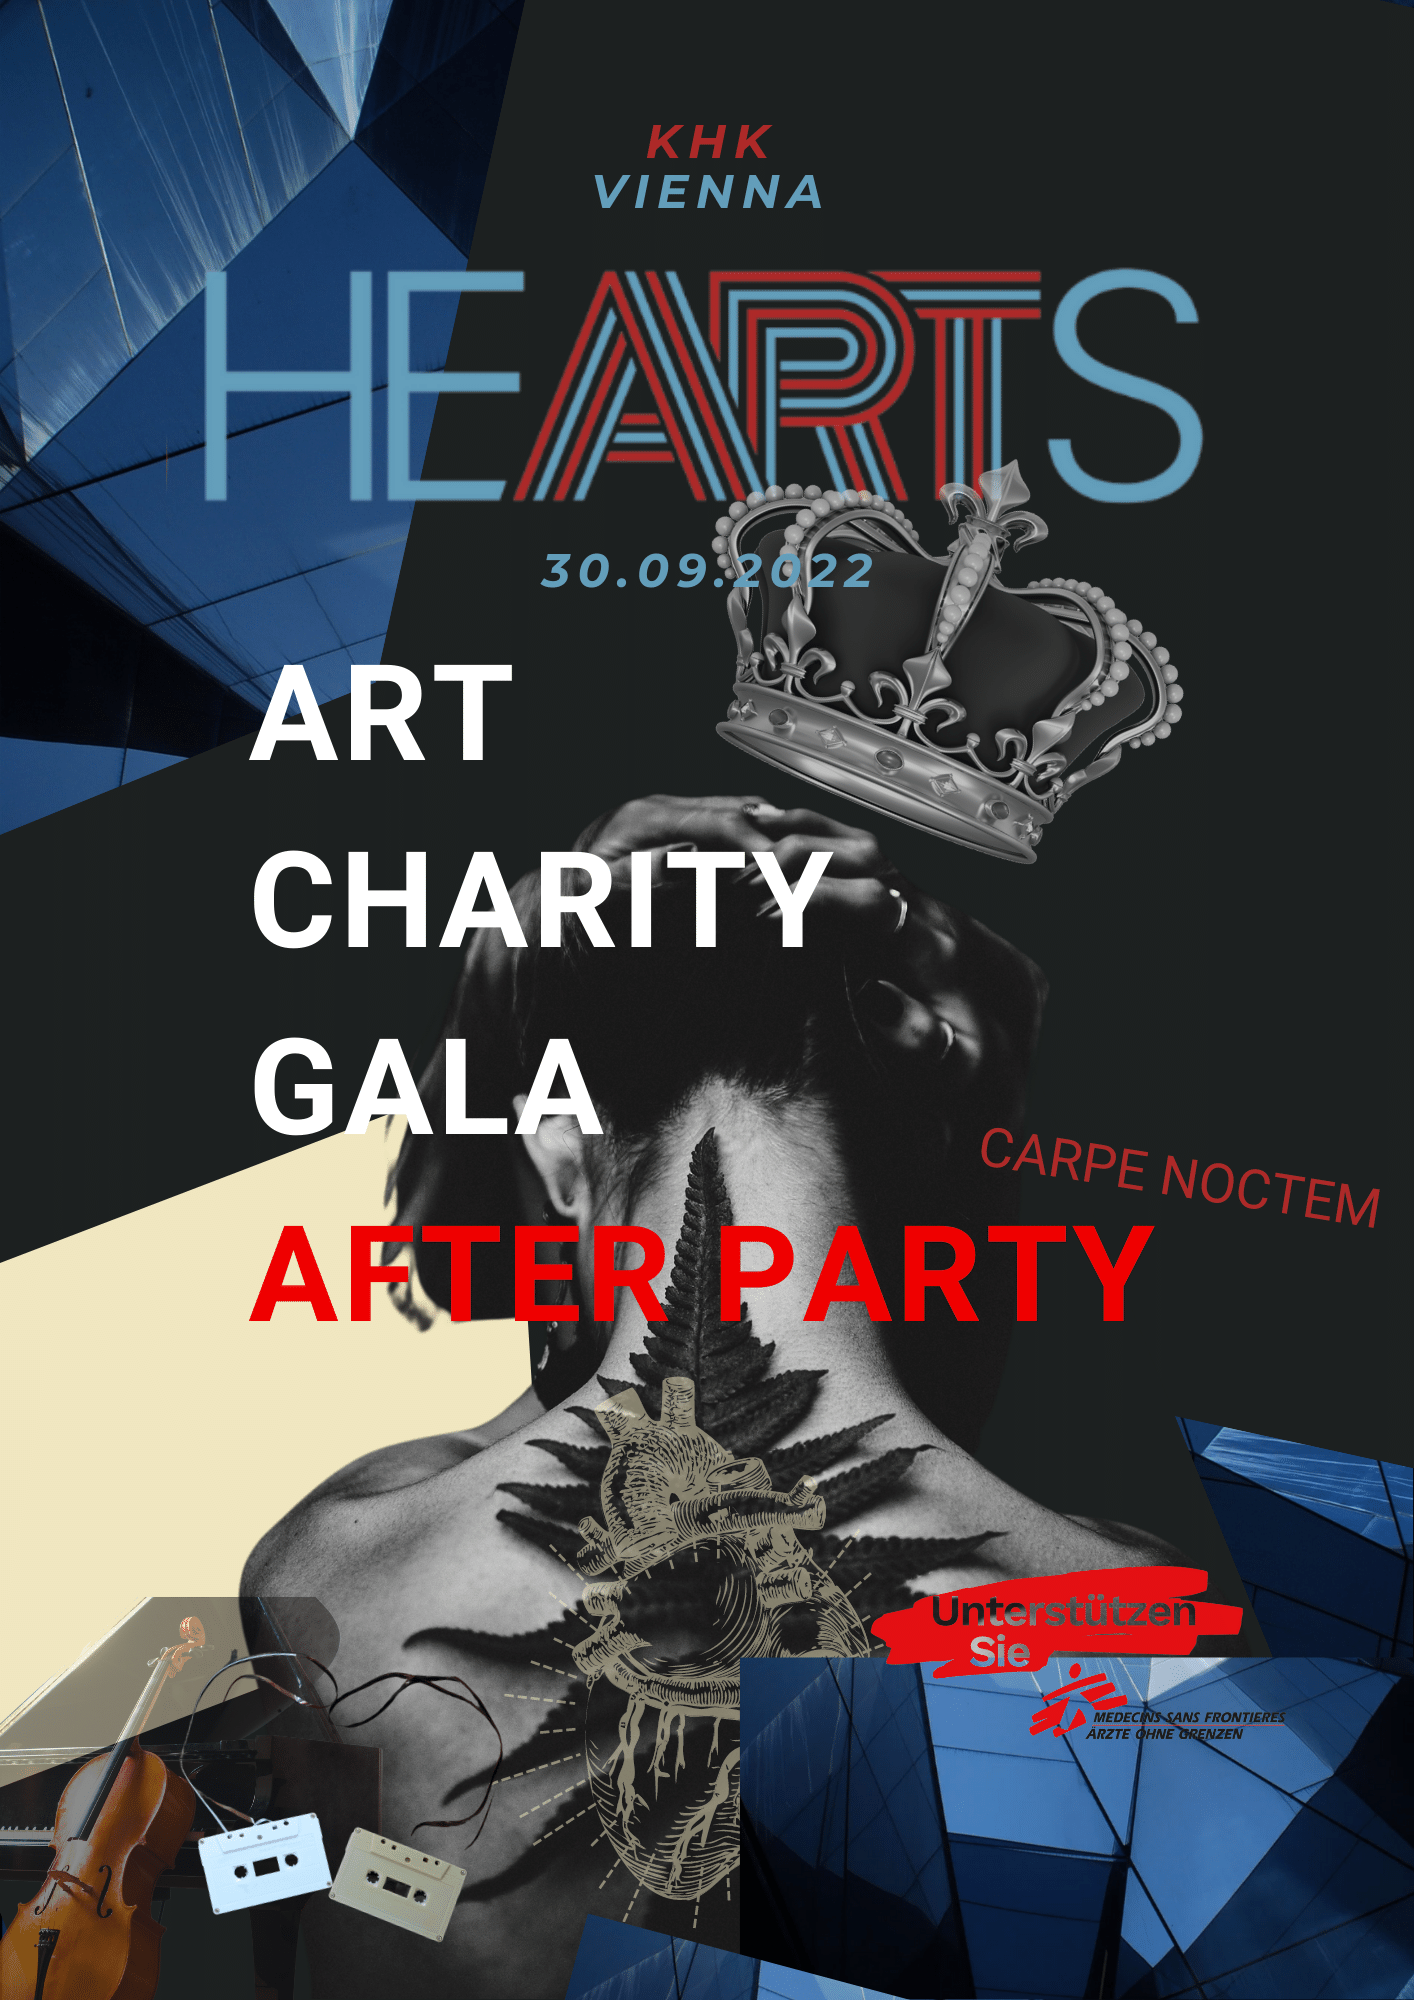 HEARTS Art Chaity Gala After Party Flyer